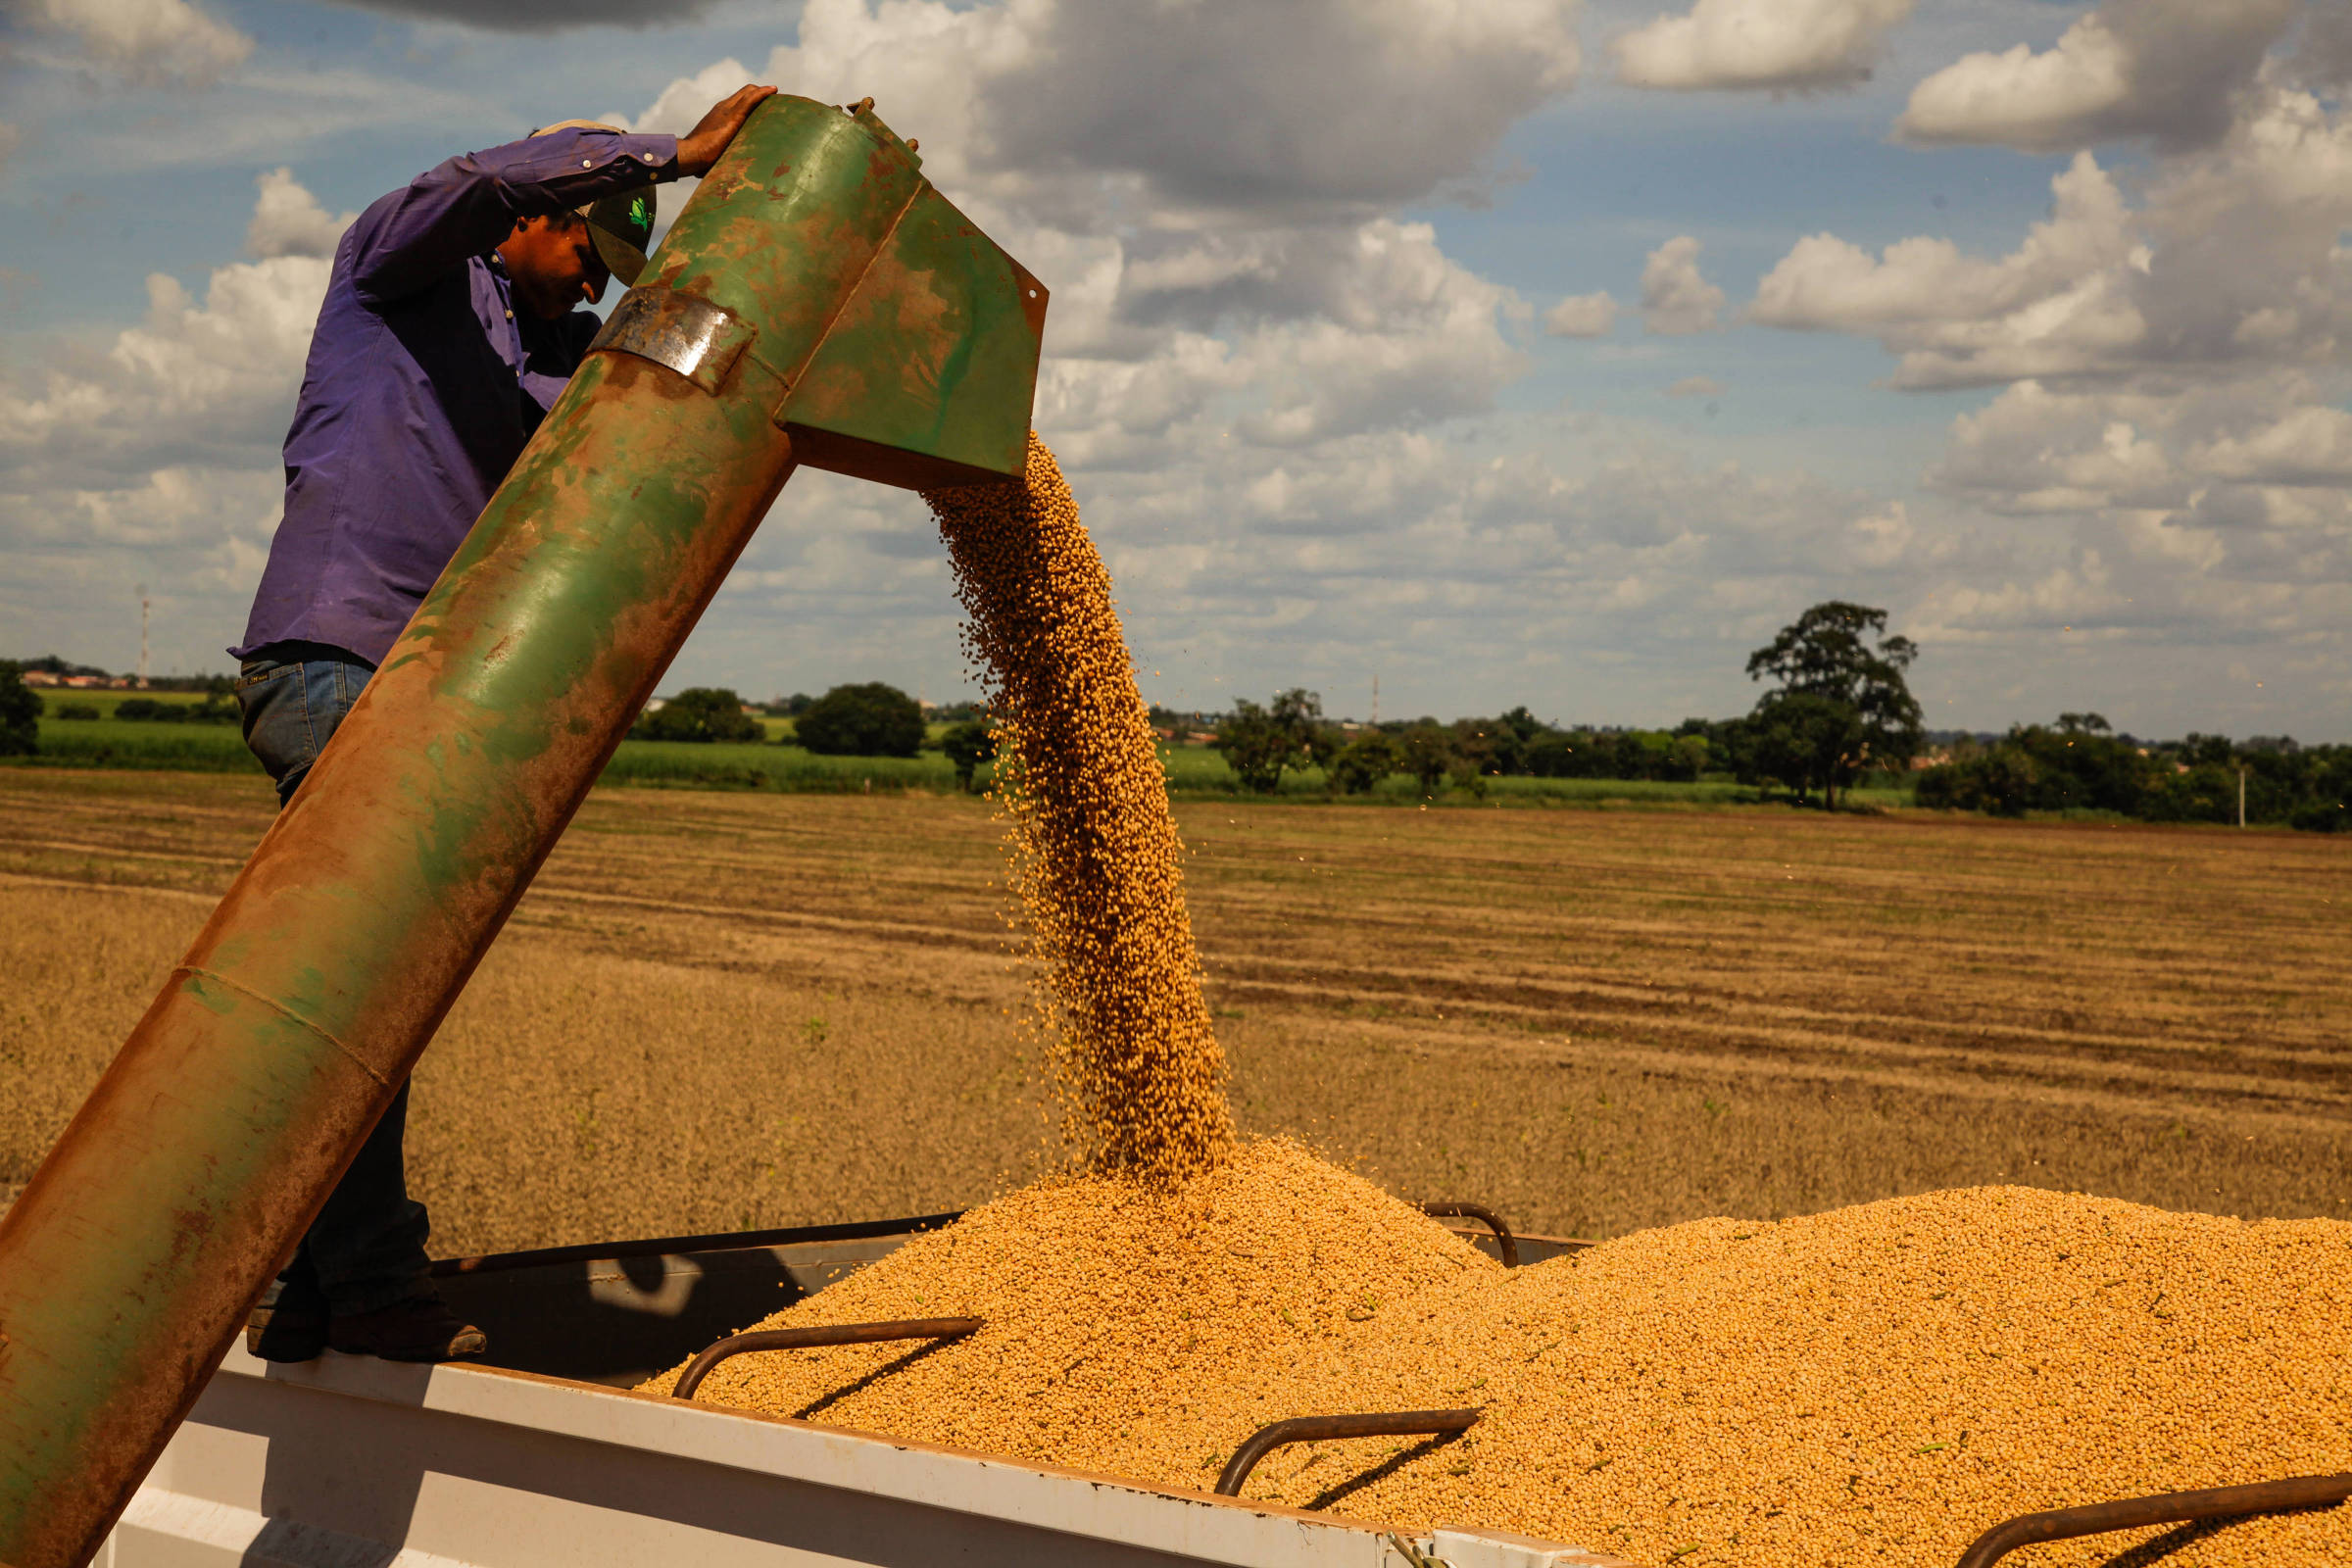 A total of 60,492 tons less soybeans were exported by Paraguay in the first two months of the year due to weather conditions, while revenues were higher compared to the same period of 2021.